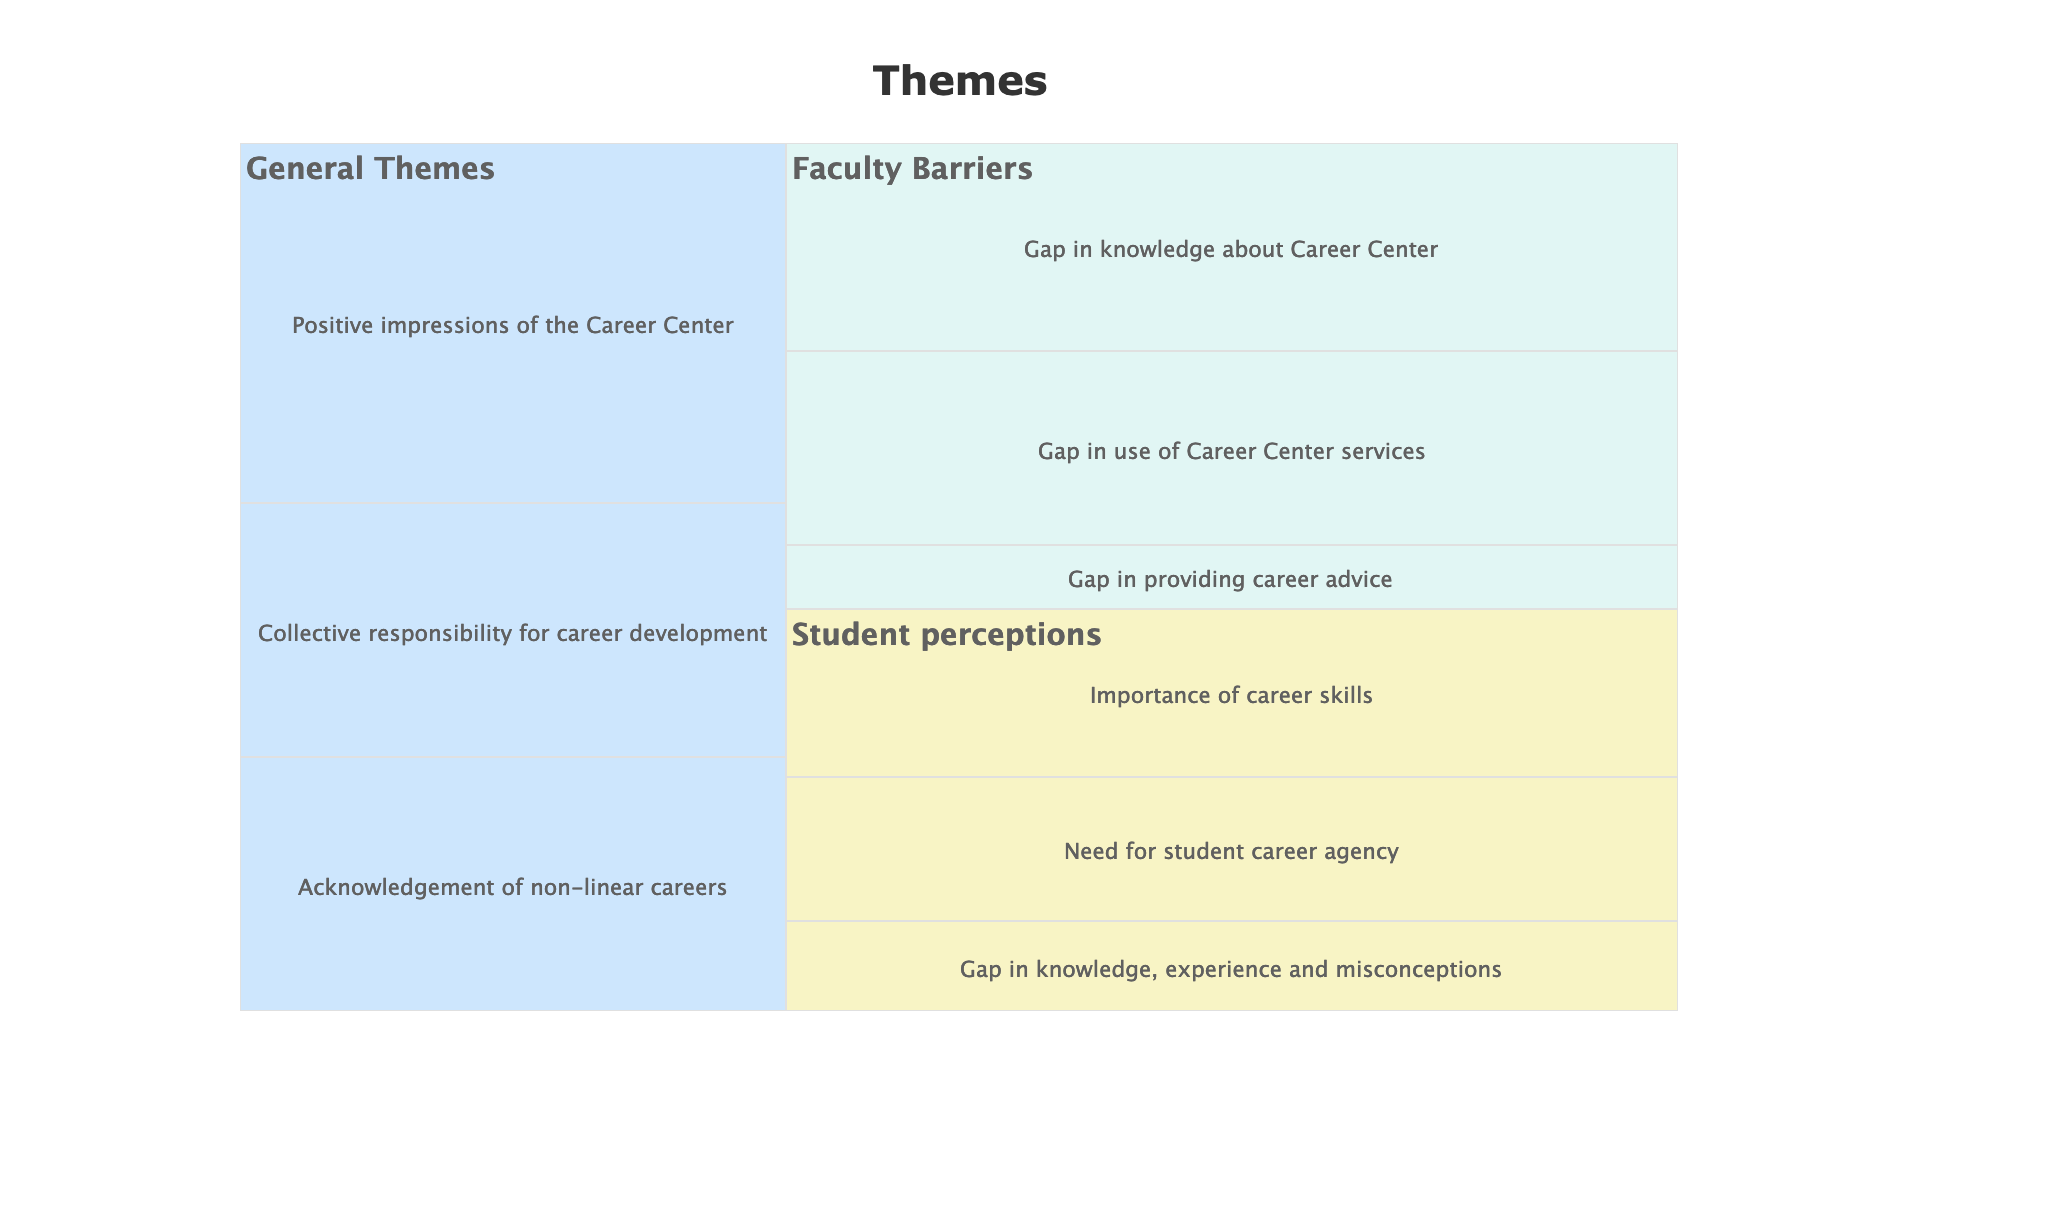 This table shows the general themes and faculty barriers in the study. The general themes are positive impressions of the career center, collective responsibility for career development and acknowledgment of non-linear careers. The faculty barriers are gap in knowledge about the career center, gap in use of career center services and gap in providing career advice. Student perceptions are importance of career skills, need for student career agency and gap in knowledge, experience and misconceptions.